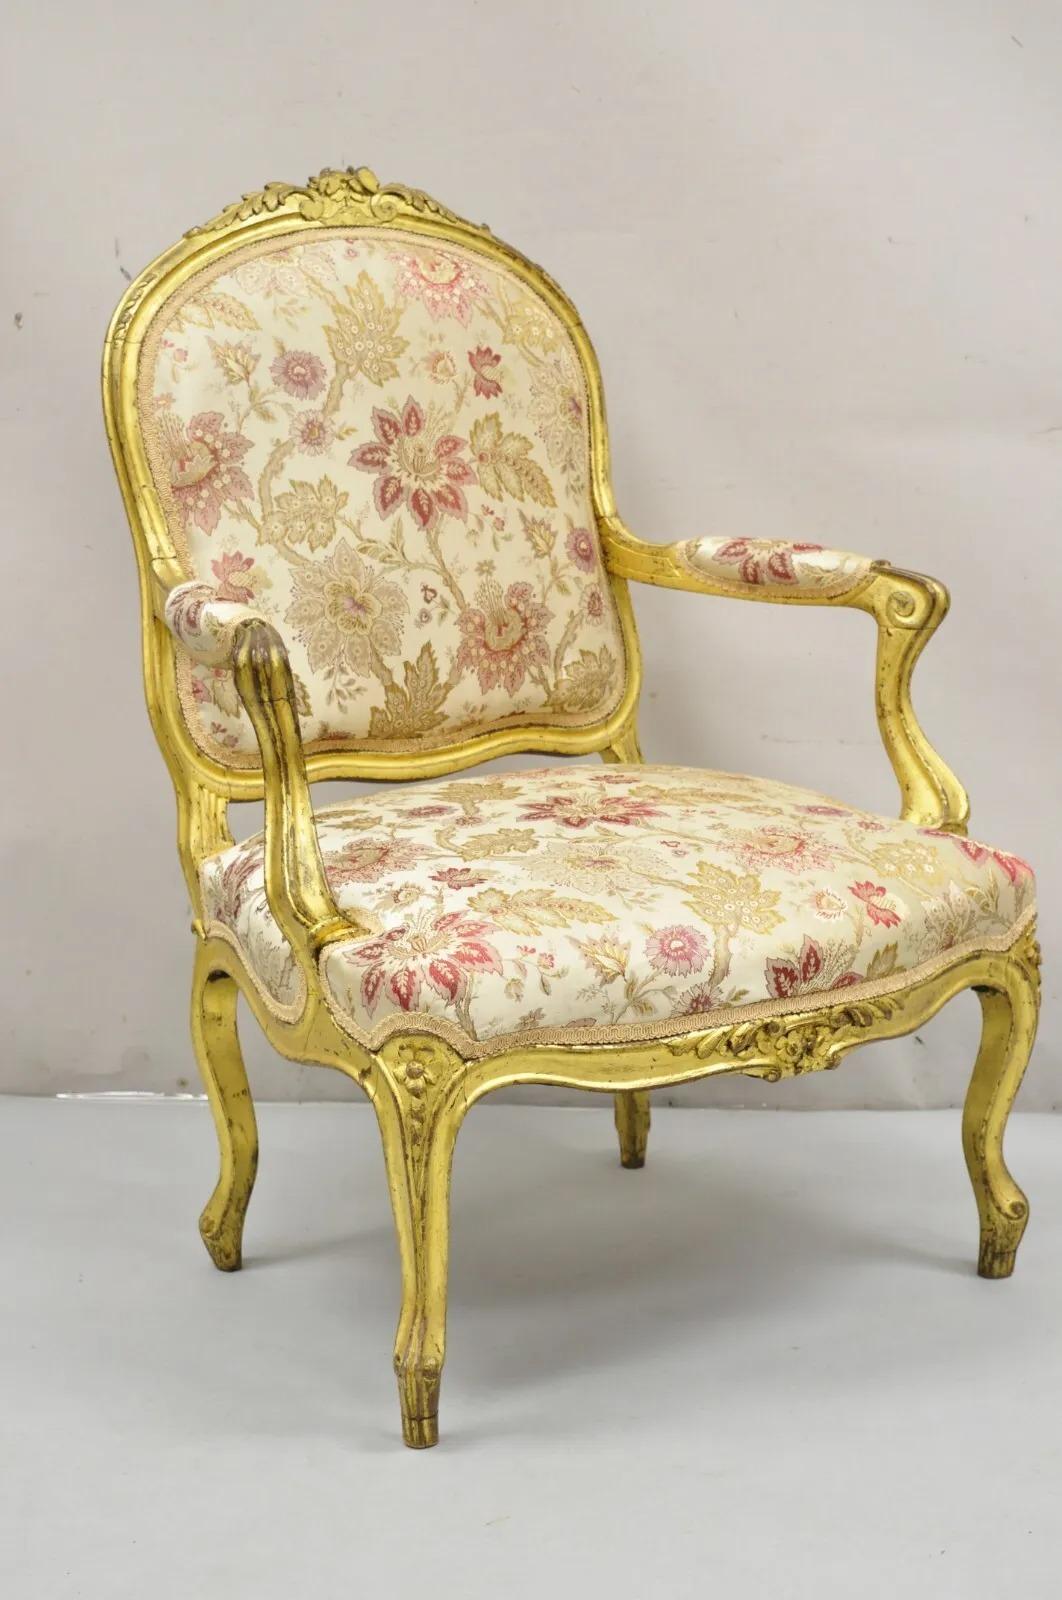 Antique French Louis XV Style Gold Giltwood Floral Carved Upholstered Arm Chair. Item features a carved gilt wood frame, distressed gold finish, floral print upholstery. Circa 19th Century Measurements: 39